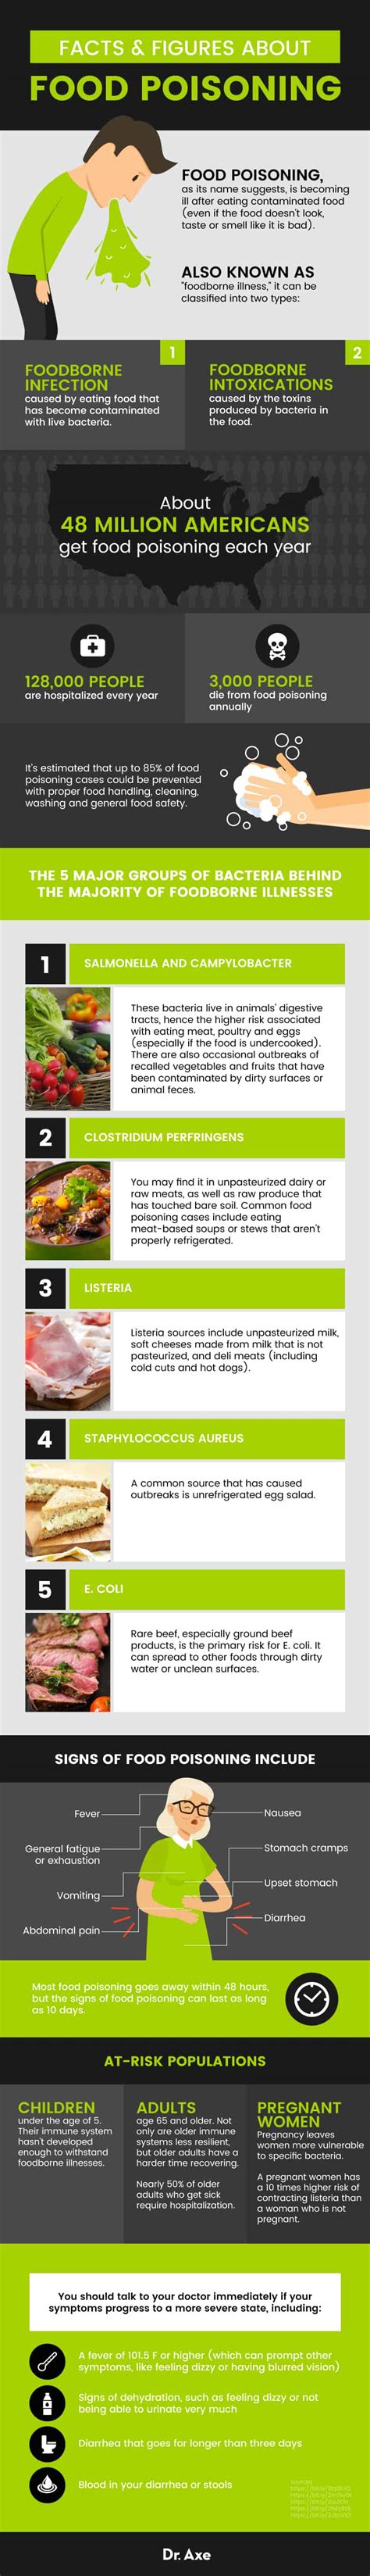 Signs Of Food Poisoning 5 Food Safety Tips Best Pure Essential Oils